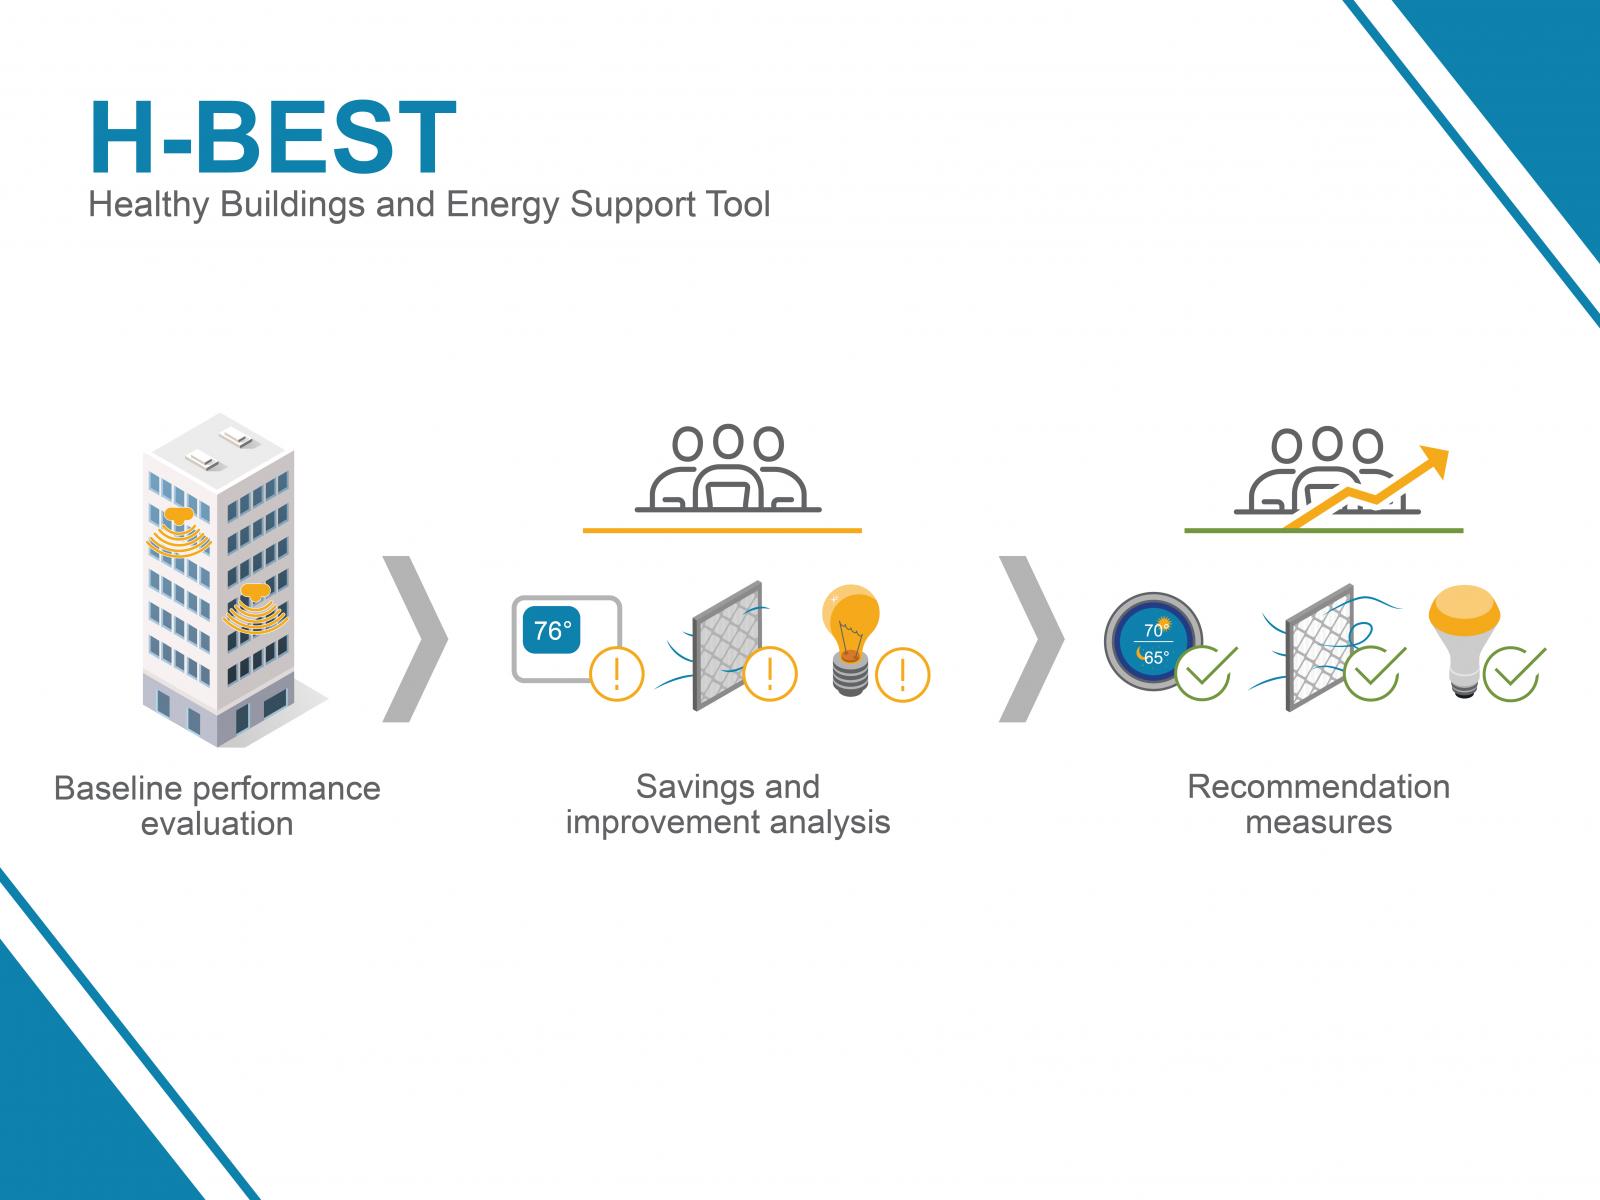 H-BEST promotes health and efficiency in buildings